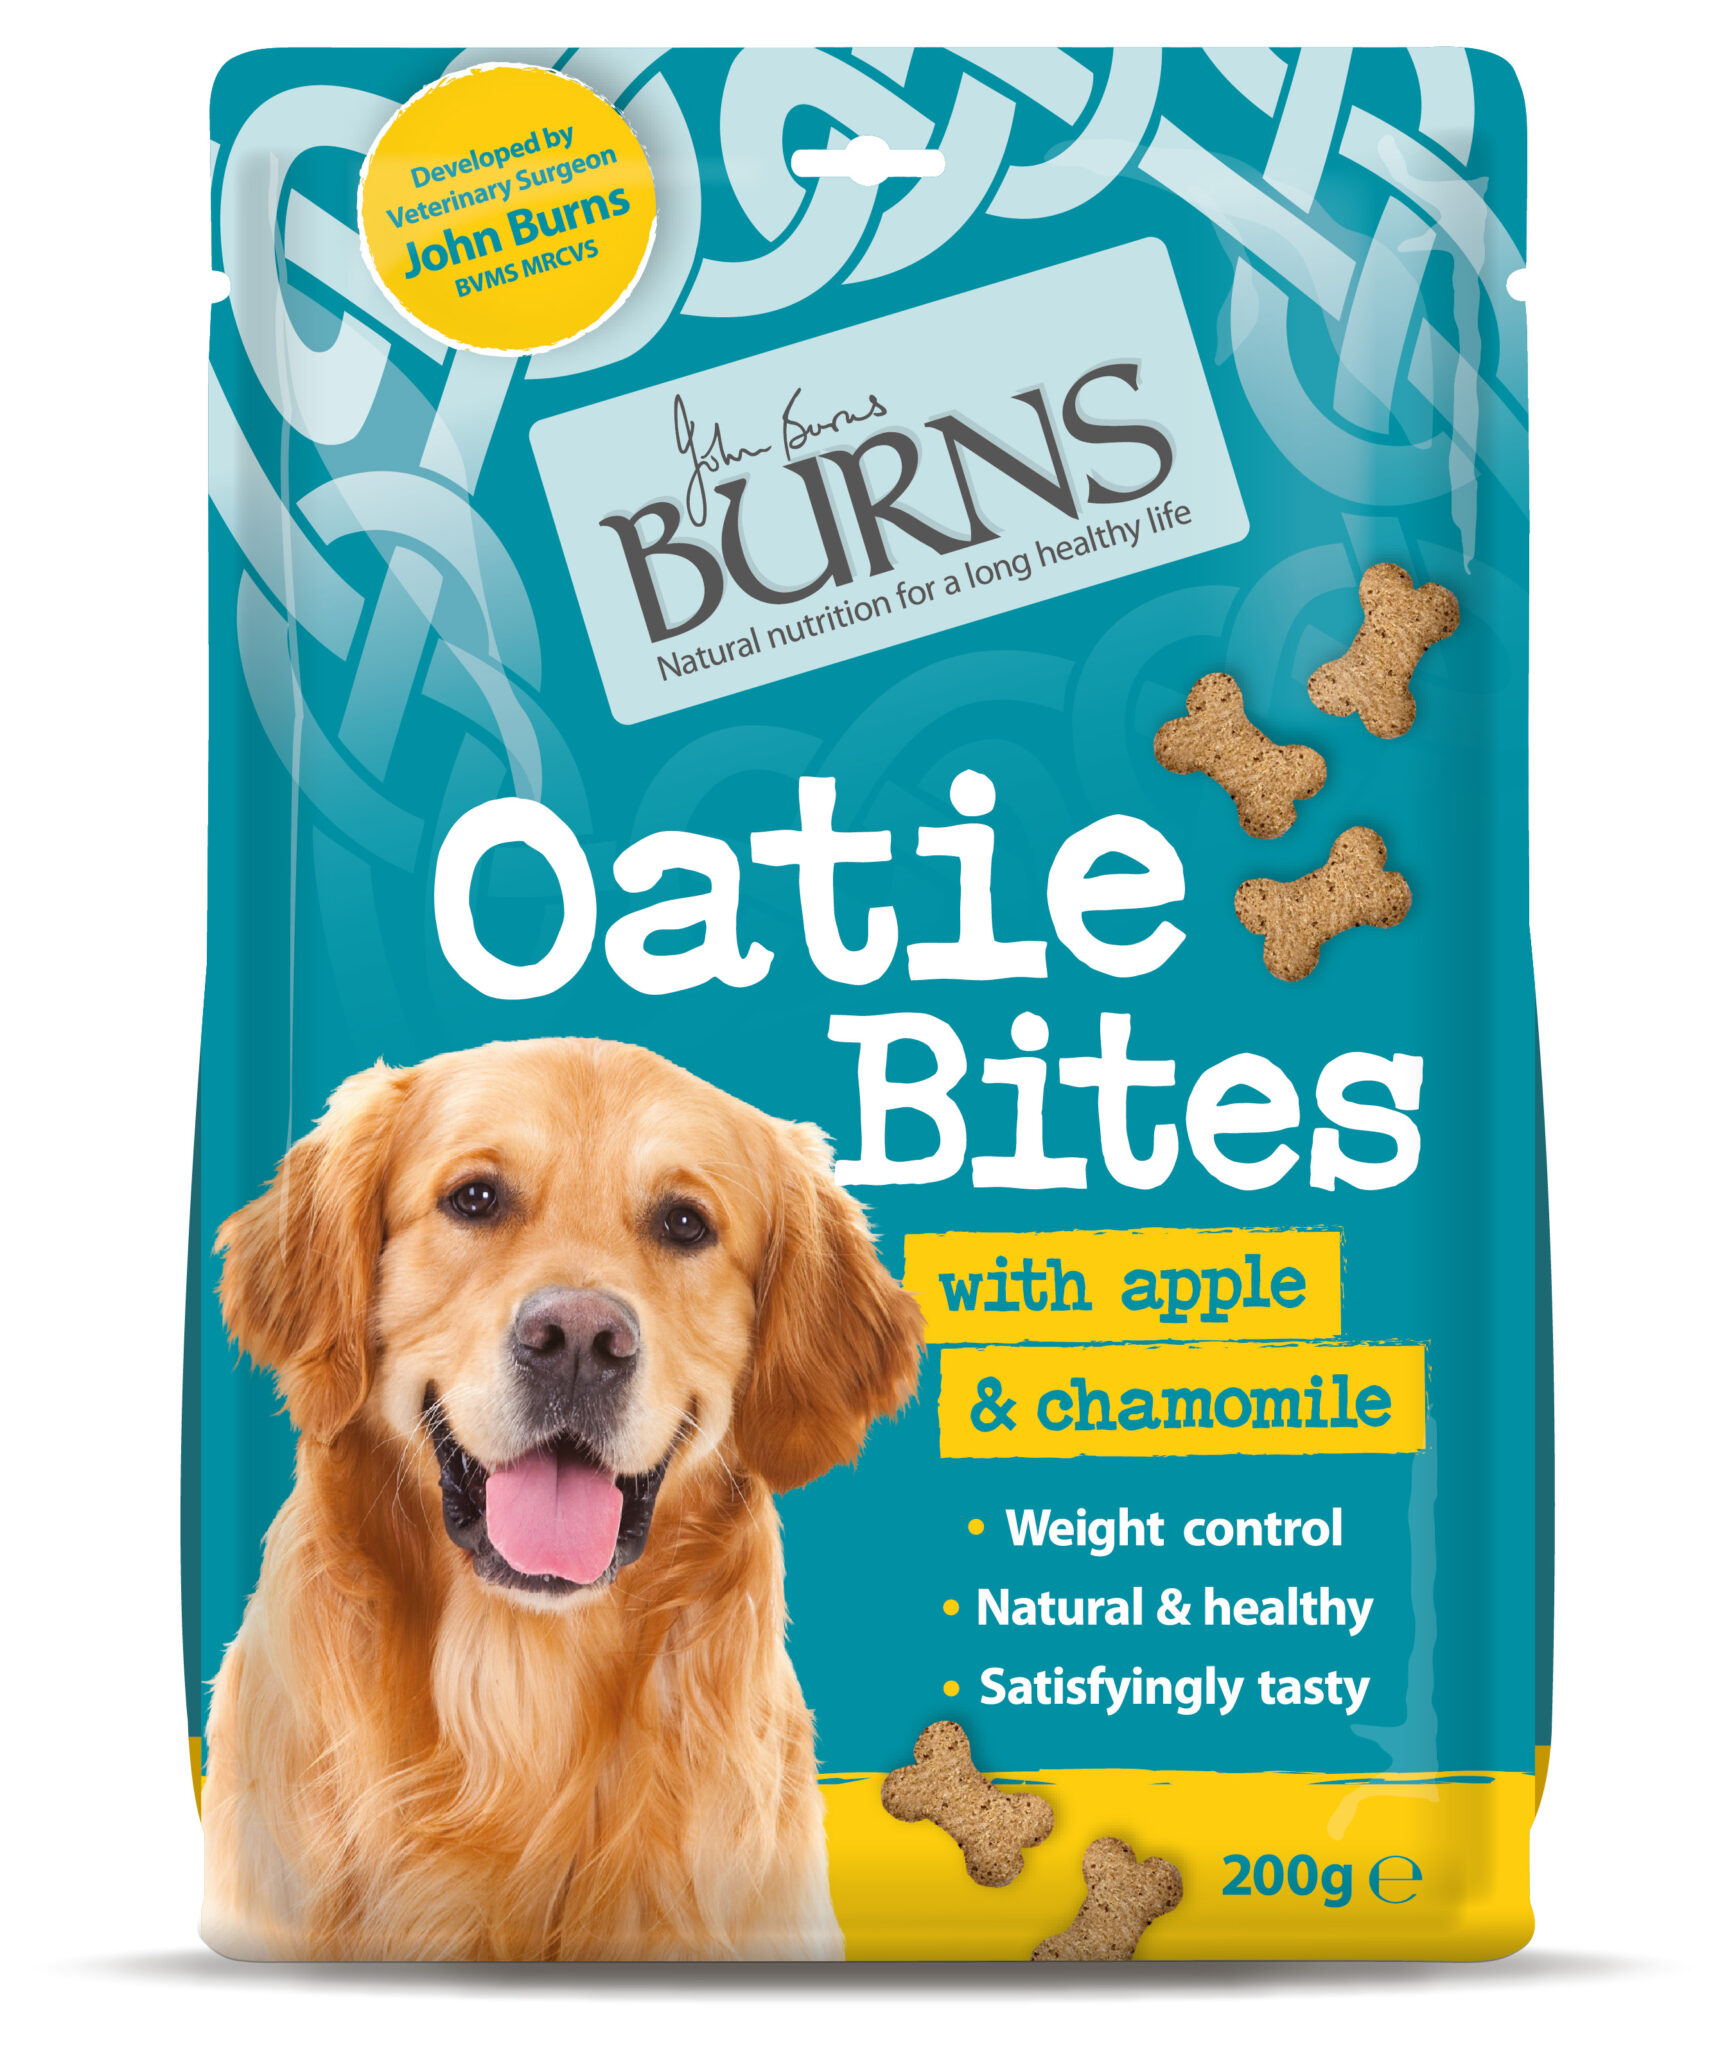 Suppliers of Oatie Bites With Apple & Chamomile UK